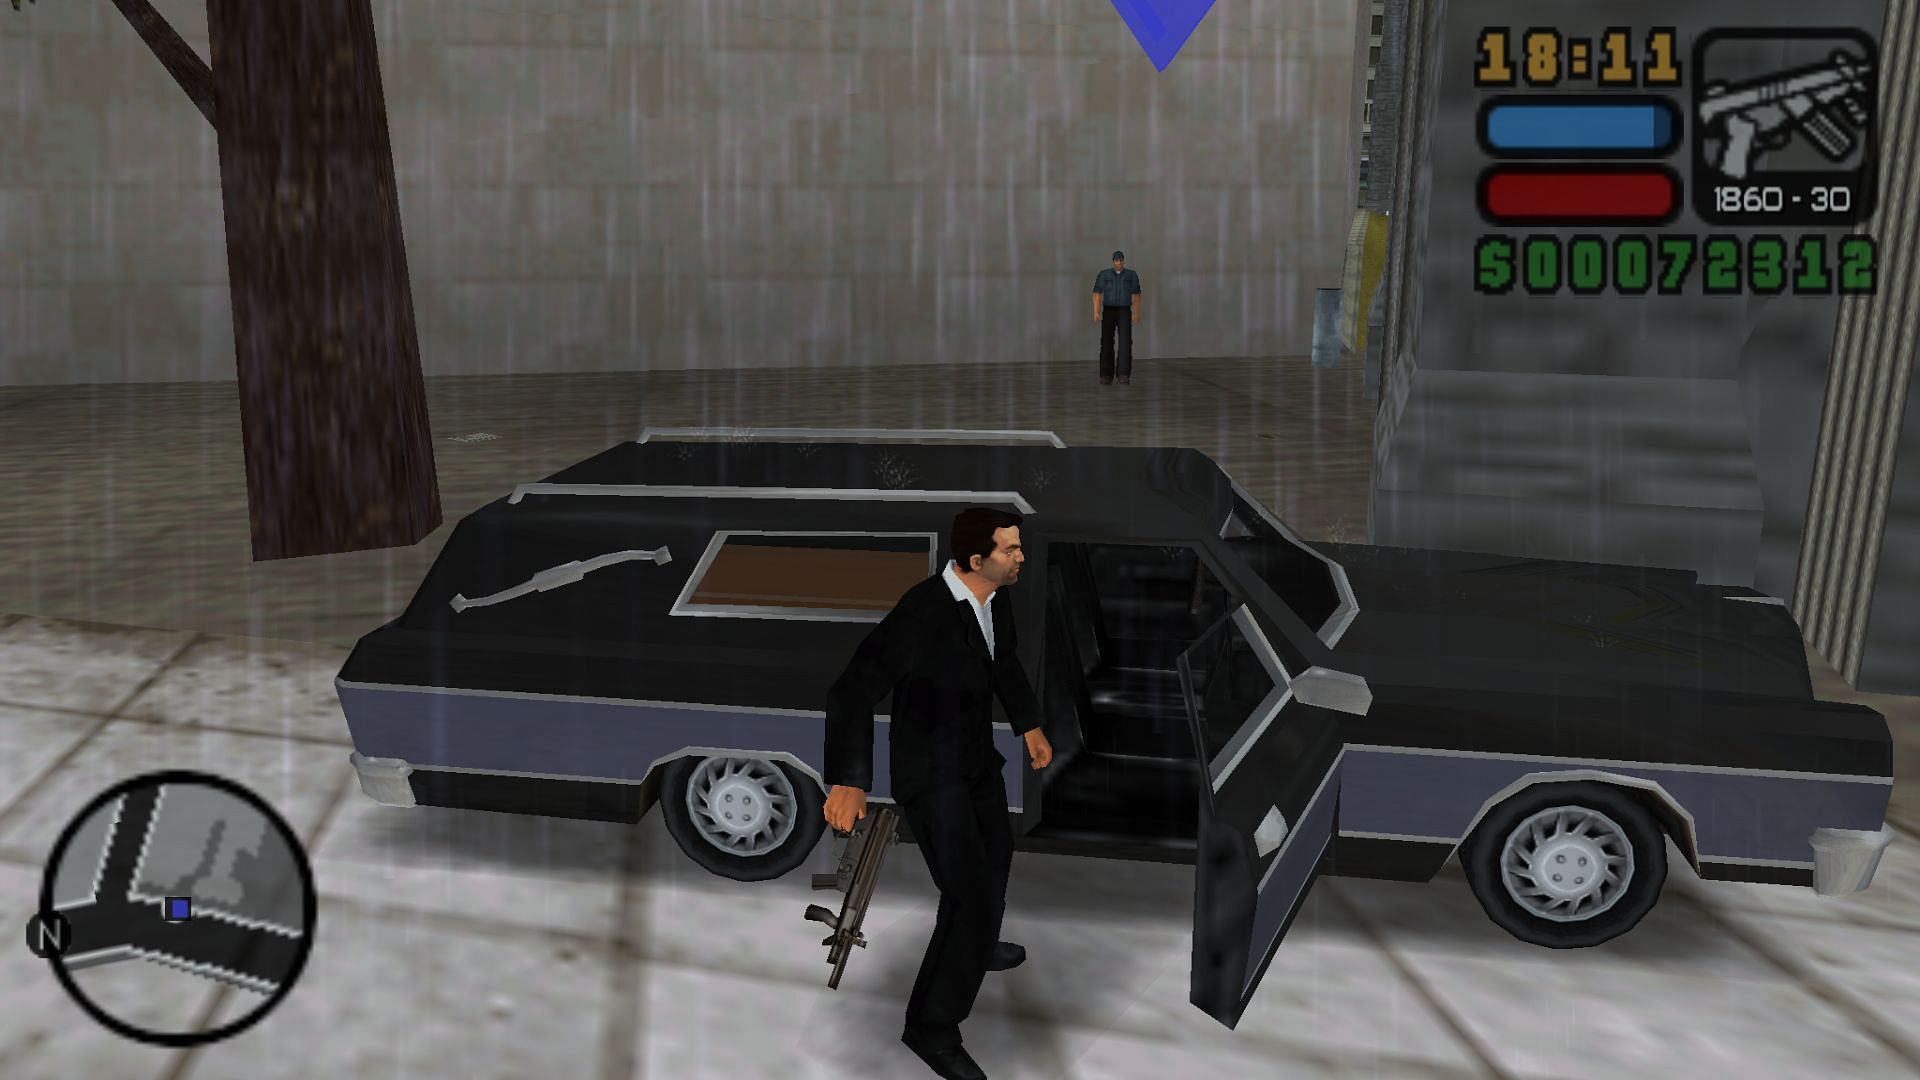 The hearse has one of the bodies you need to steal (Image via GTA Wiki)